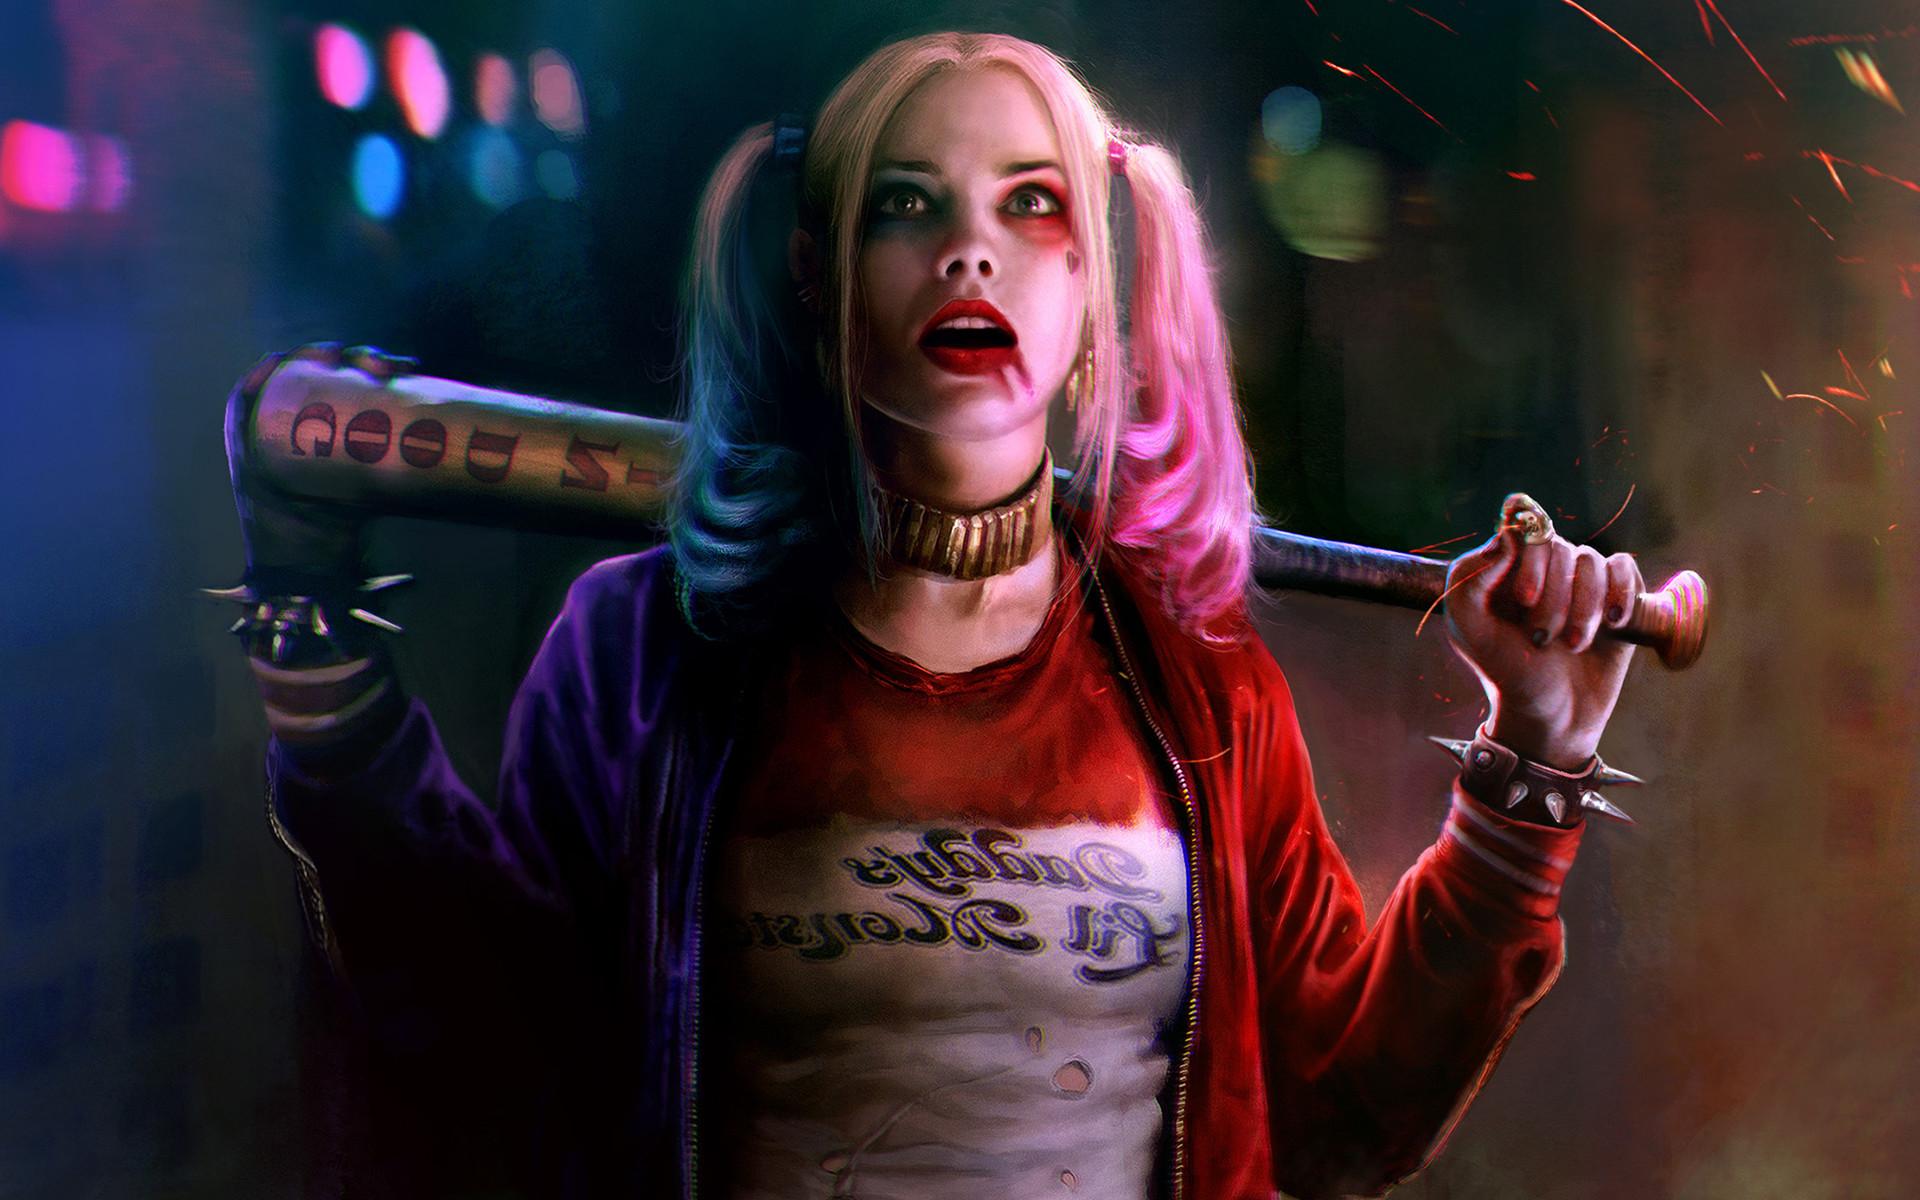 Harley Quinn Hd Wallpapers Top Free Harley Quinn Hd Backgrounds Hot